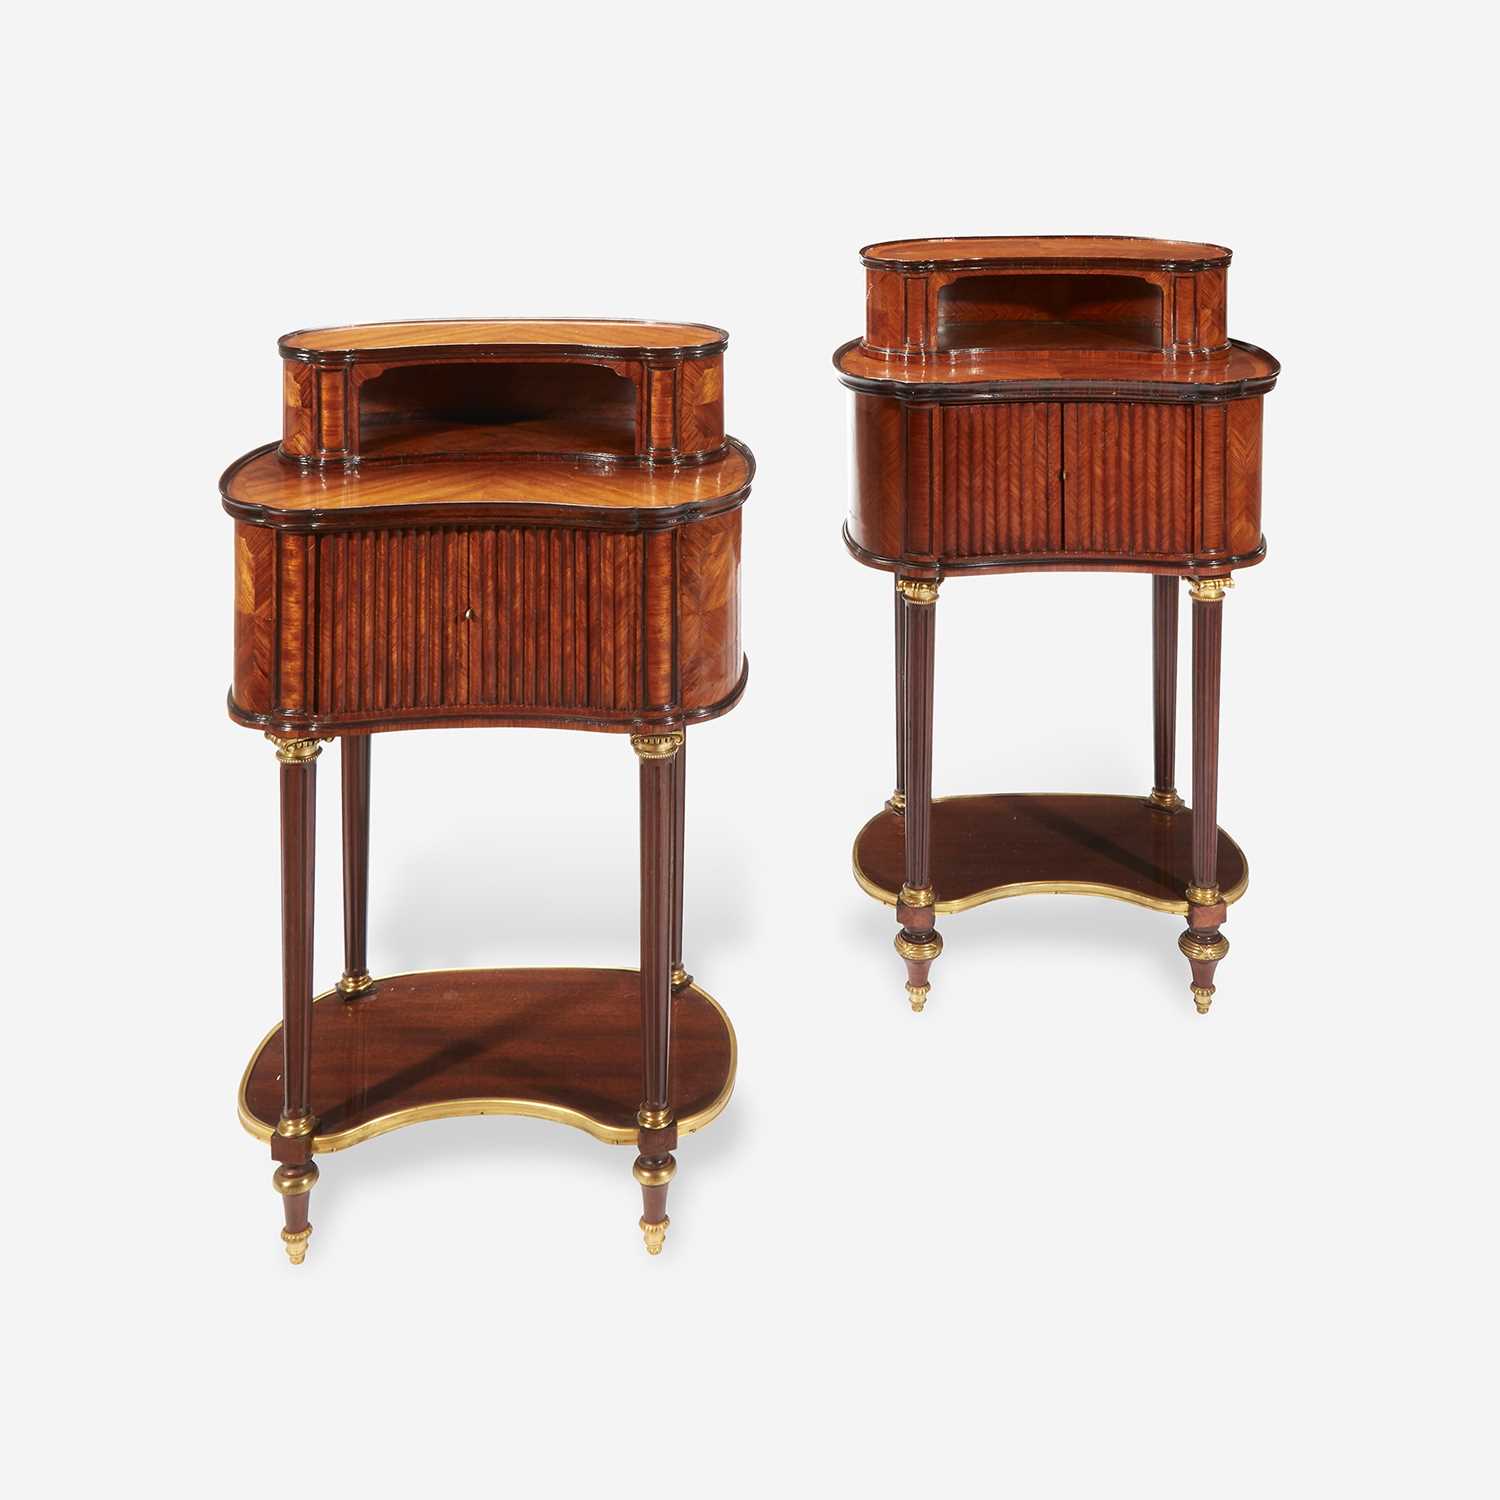 Lot 33 - A Pair of Louis XVI Style Gilt-Bronze Mounted Fruitwood and Mahogany Side Tables